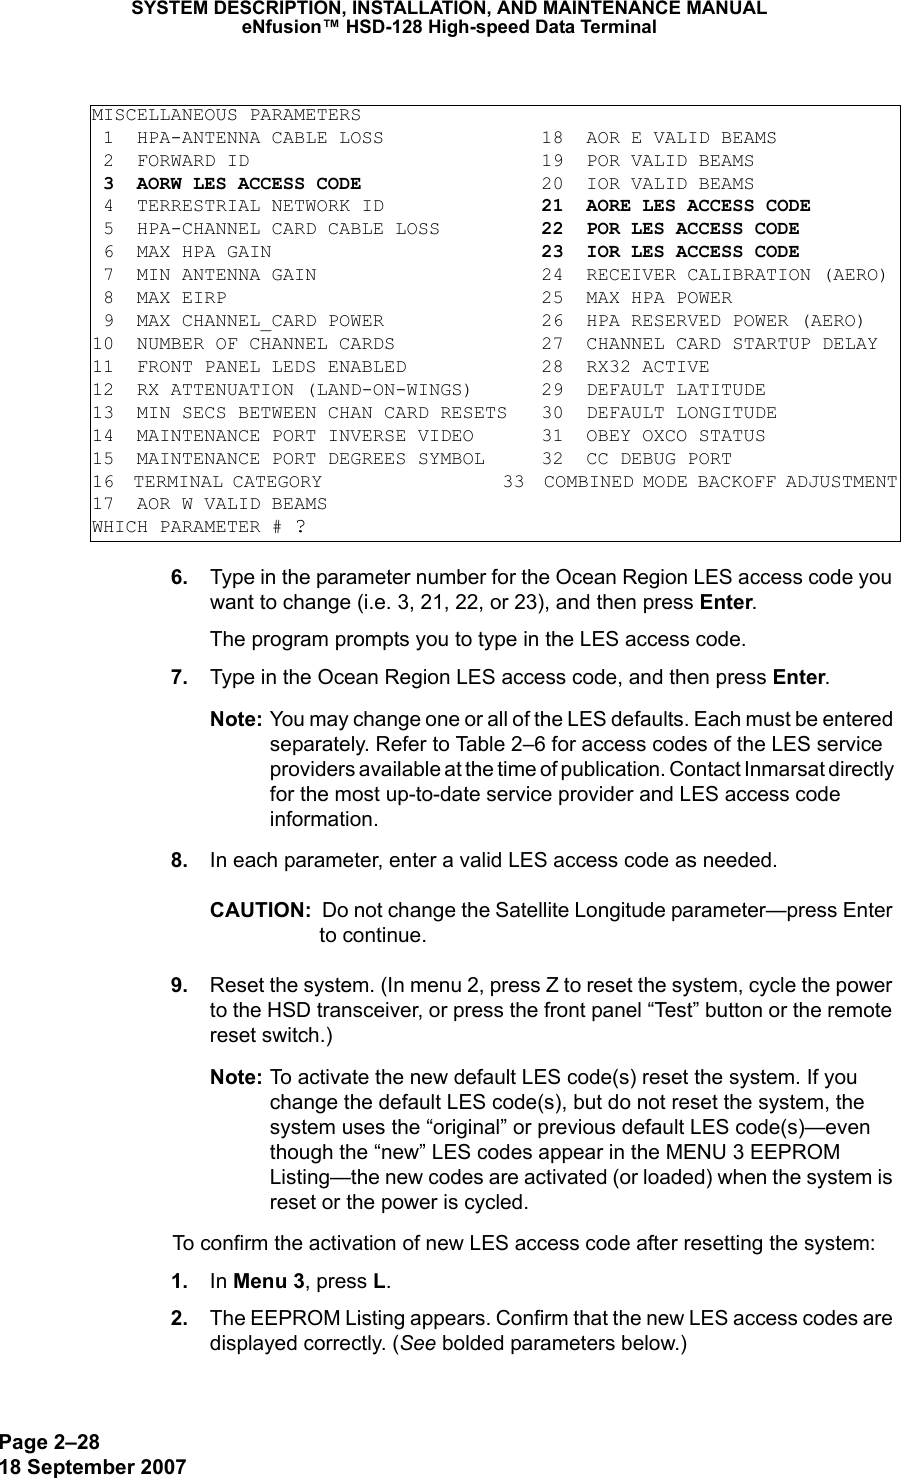 Page 2–2818 September 2007SYSTEM DESCRIPTION, INSTALLATION, AND MAINTENANCE MANUALeNfusion™ HSD-128 High-speed Data Terminal 6. Type in the parameter number for the Ocean Region LES access code you want to change (i.e. 3, 21, 22, or 23), and then press Enter.The program prompts you to type in the LES access code. 7. Type in the Ocean Region LES access code, and then press Enter.Note: You may change one or all of the LES defaults. Each must be entered separately. Refer to Table 2–6 for access codes of the LES service providers available at the time of publication. Contact Inmarsat directly for the most up-to-date service provider and LES access code information. 8. In each parameter, enter a valid LES access code as needed.CAUTION:  Do not change the Satellite Longitude parameter—press Enter to continue.  9. Reset the system. (In menu 2, press Z to reset the system, cycle the power to the HSD transceiver, or press the front panel “Test” button or the remote reset switch.)Note: To activate the new default LES code(s) reset the system. If you change the default LES code(s), but do not reset the system, the system uses the “original” or previous default LES code(s)—even though the “new” LES codes appear in the MENU 3 EEPROM Listing—the new codes are activated (or loaded) when the system is reset or the power is cycled. To confirm the activation of new LES access code after resetting the system: 1. In Menu 3, press L. 2. The EEPROM Listing appears. Confirm that the new LES access codes are displayed correctly. (See bolded parameters below.)MISCELLANEOUS PARAMETERS 1  HPA-ANTENNA CABLE LOSS              18  AOR E VALID BEAMS 2  FORWARD ID                          19  POR VALID BEAMS 3  AORW LES ACCESS CODE                20  IOR VALID BEAMS 4  TERRESTRIAL NETWORK ID              21  AORE LES ACCESS CODE 5  HPA-CHANNEL CARD CABLE LOSS         22  POR LES ACCESS CODE 6  MAX HPA GAIN                        23  IOR LES ACCESS CODE 7  MIN ANTENNA GAIN                    24  RECEIVER CALIBRATION (AERO) 8  MAX EIRP                            25  MAX HPA POWER 9  MAX CHANNEL_CARD POWER              26  HPA RESERVED POWER (AERO)10  NUMBER OF CHANNEL CARDS             27  CHANNEL CARD STARTUP DELAY11  FRONT PANEL LEDS ENABLED            28  RX32 ACTIVE12  RX ATTENUATION (LAND-ON-WINGS)      29  DEFAULT LATITUDE13  MIN SECS BETWEEN CHAN CARD RESETS   30  DEFAULT LONGITUDE14  MAINTENANCE PORT INVERSE VIDEO      31  OBEY OXCO STATUS15  MAINTENANCE PORT DEGREES SYMBOL     32  CC DEBUG PORT16  TERMINAL CATEGORY                   33  COMBINED MODE BACKOFF ADJUSTMENT17  AOR W VALID BEAMSWHICH PARAMETER # ?